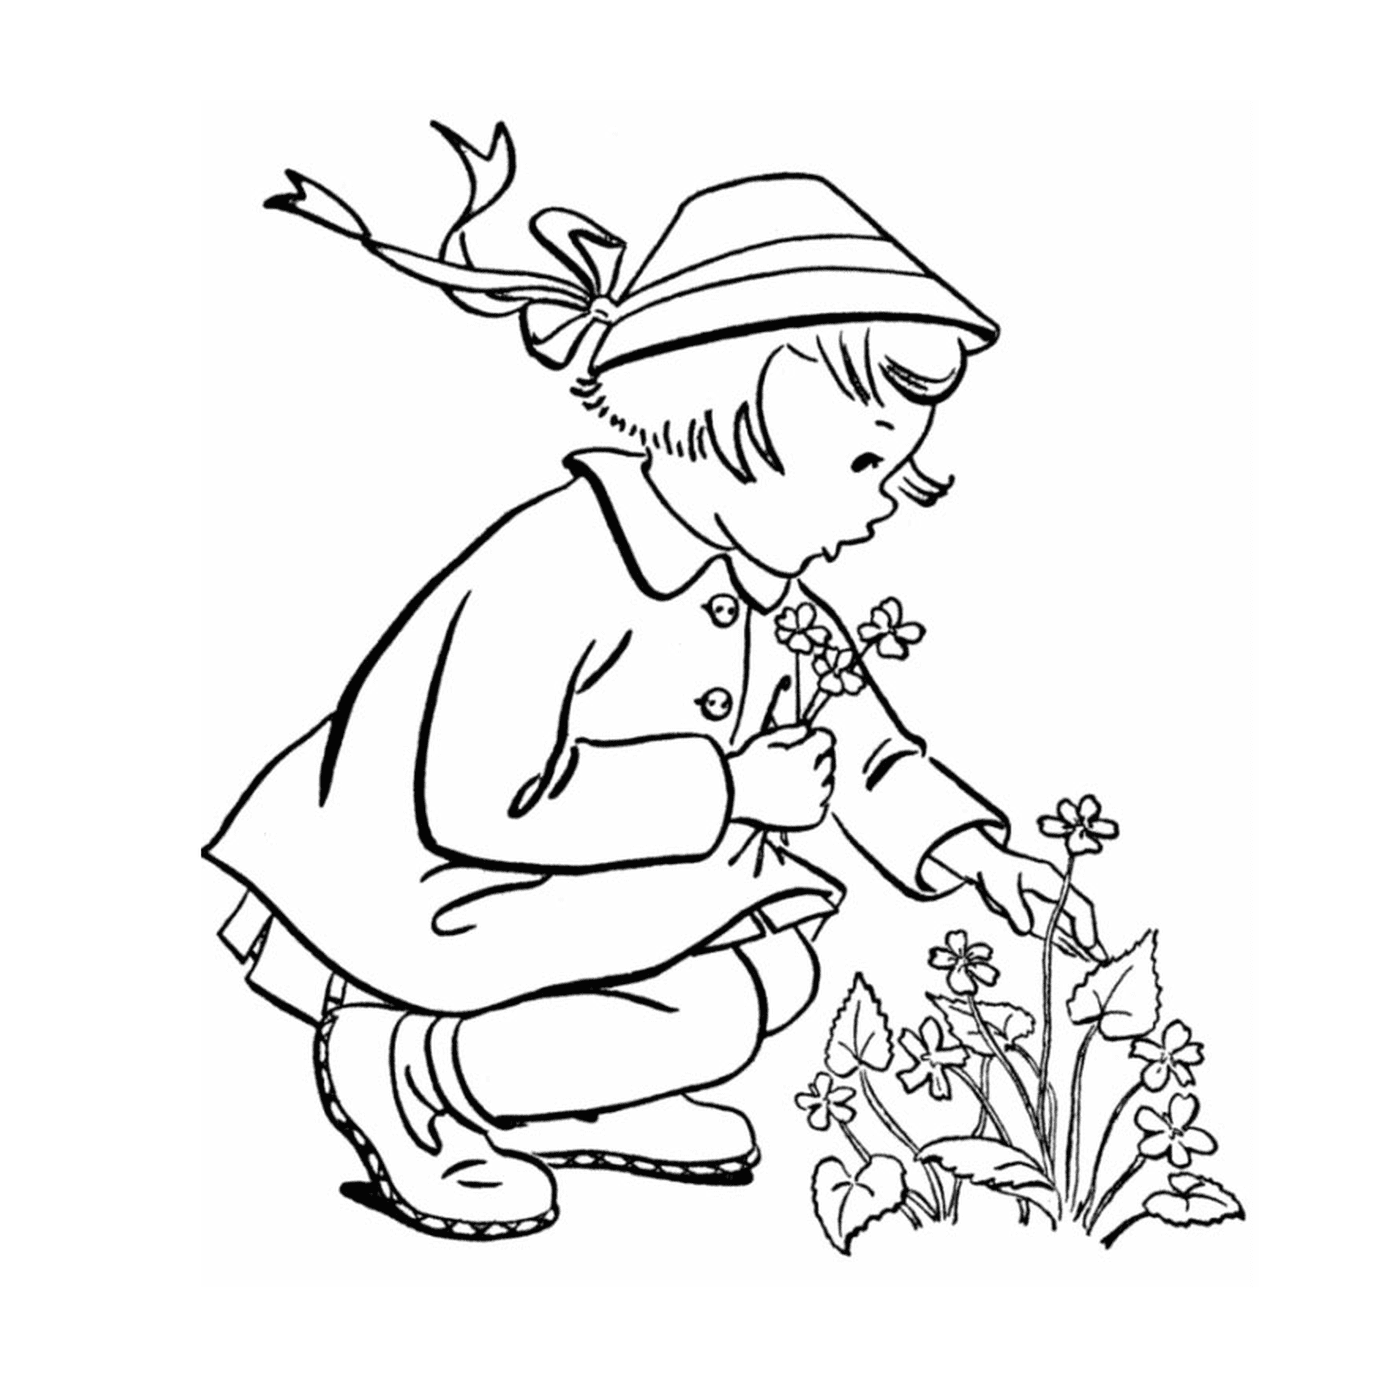  A little girl kneeling to plant a flower 